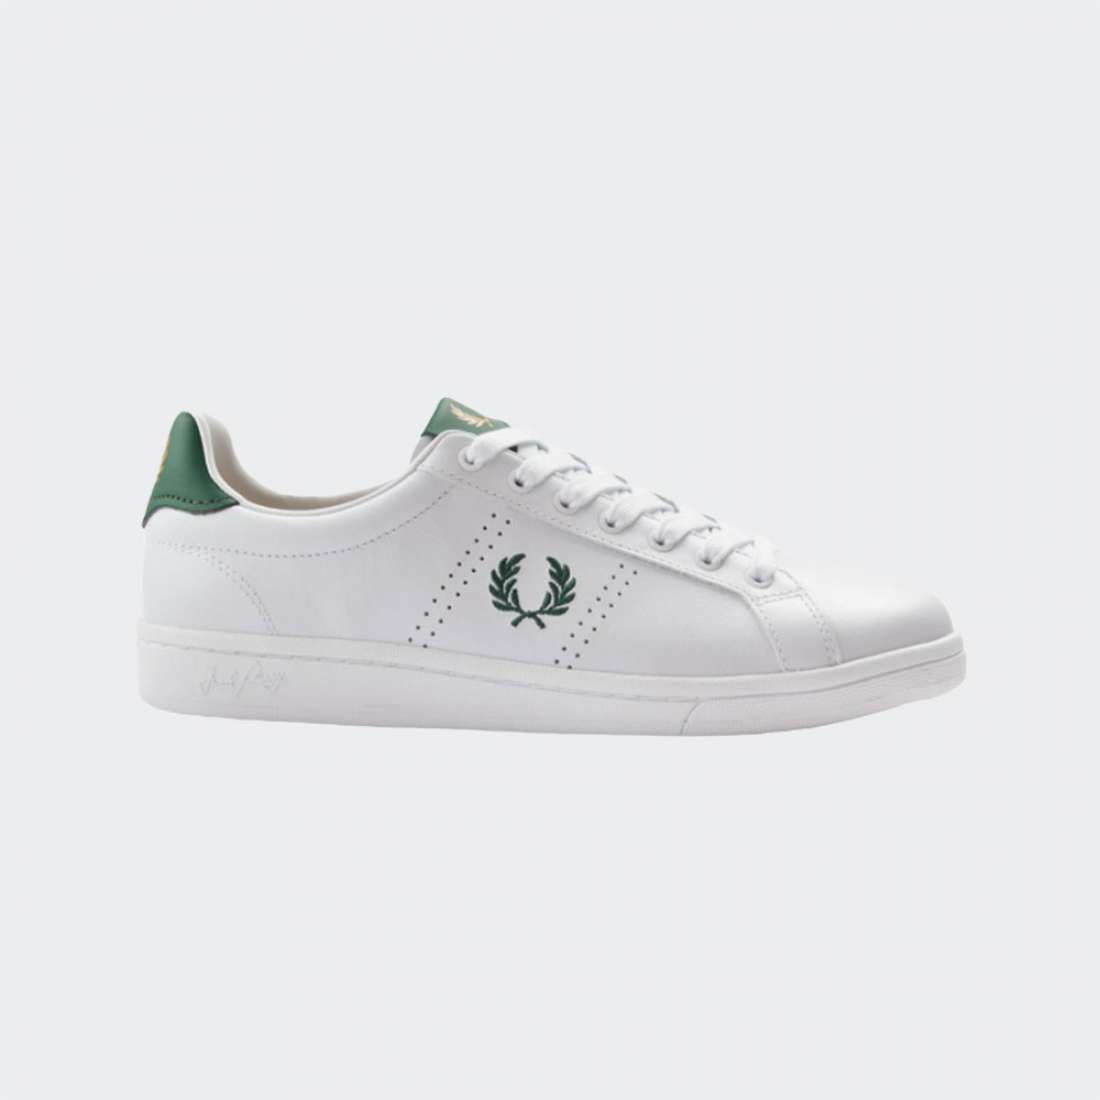 FRED PERRY B721 WHITE/GREEN